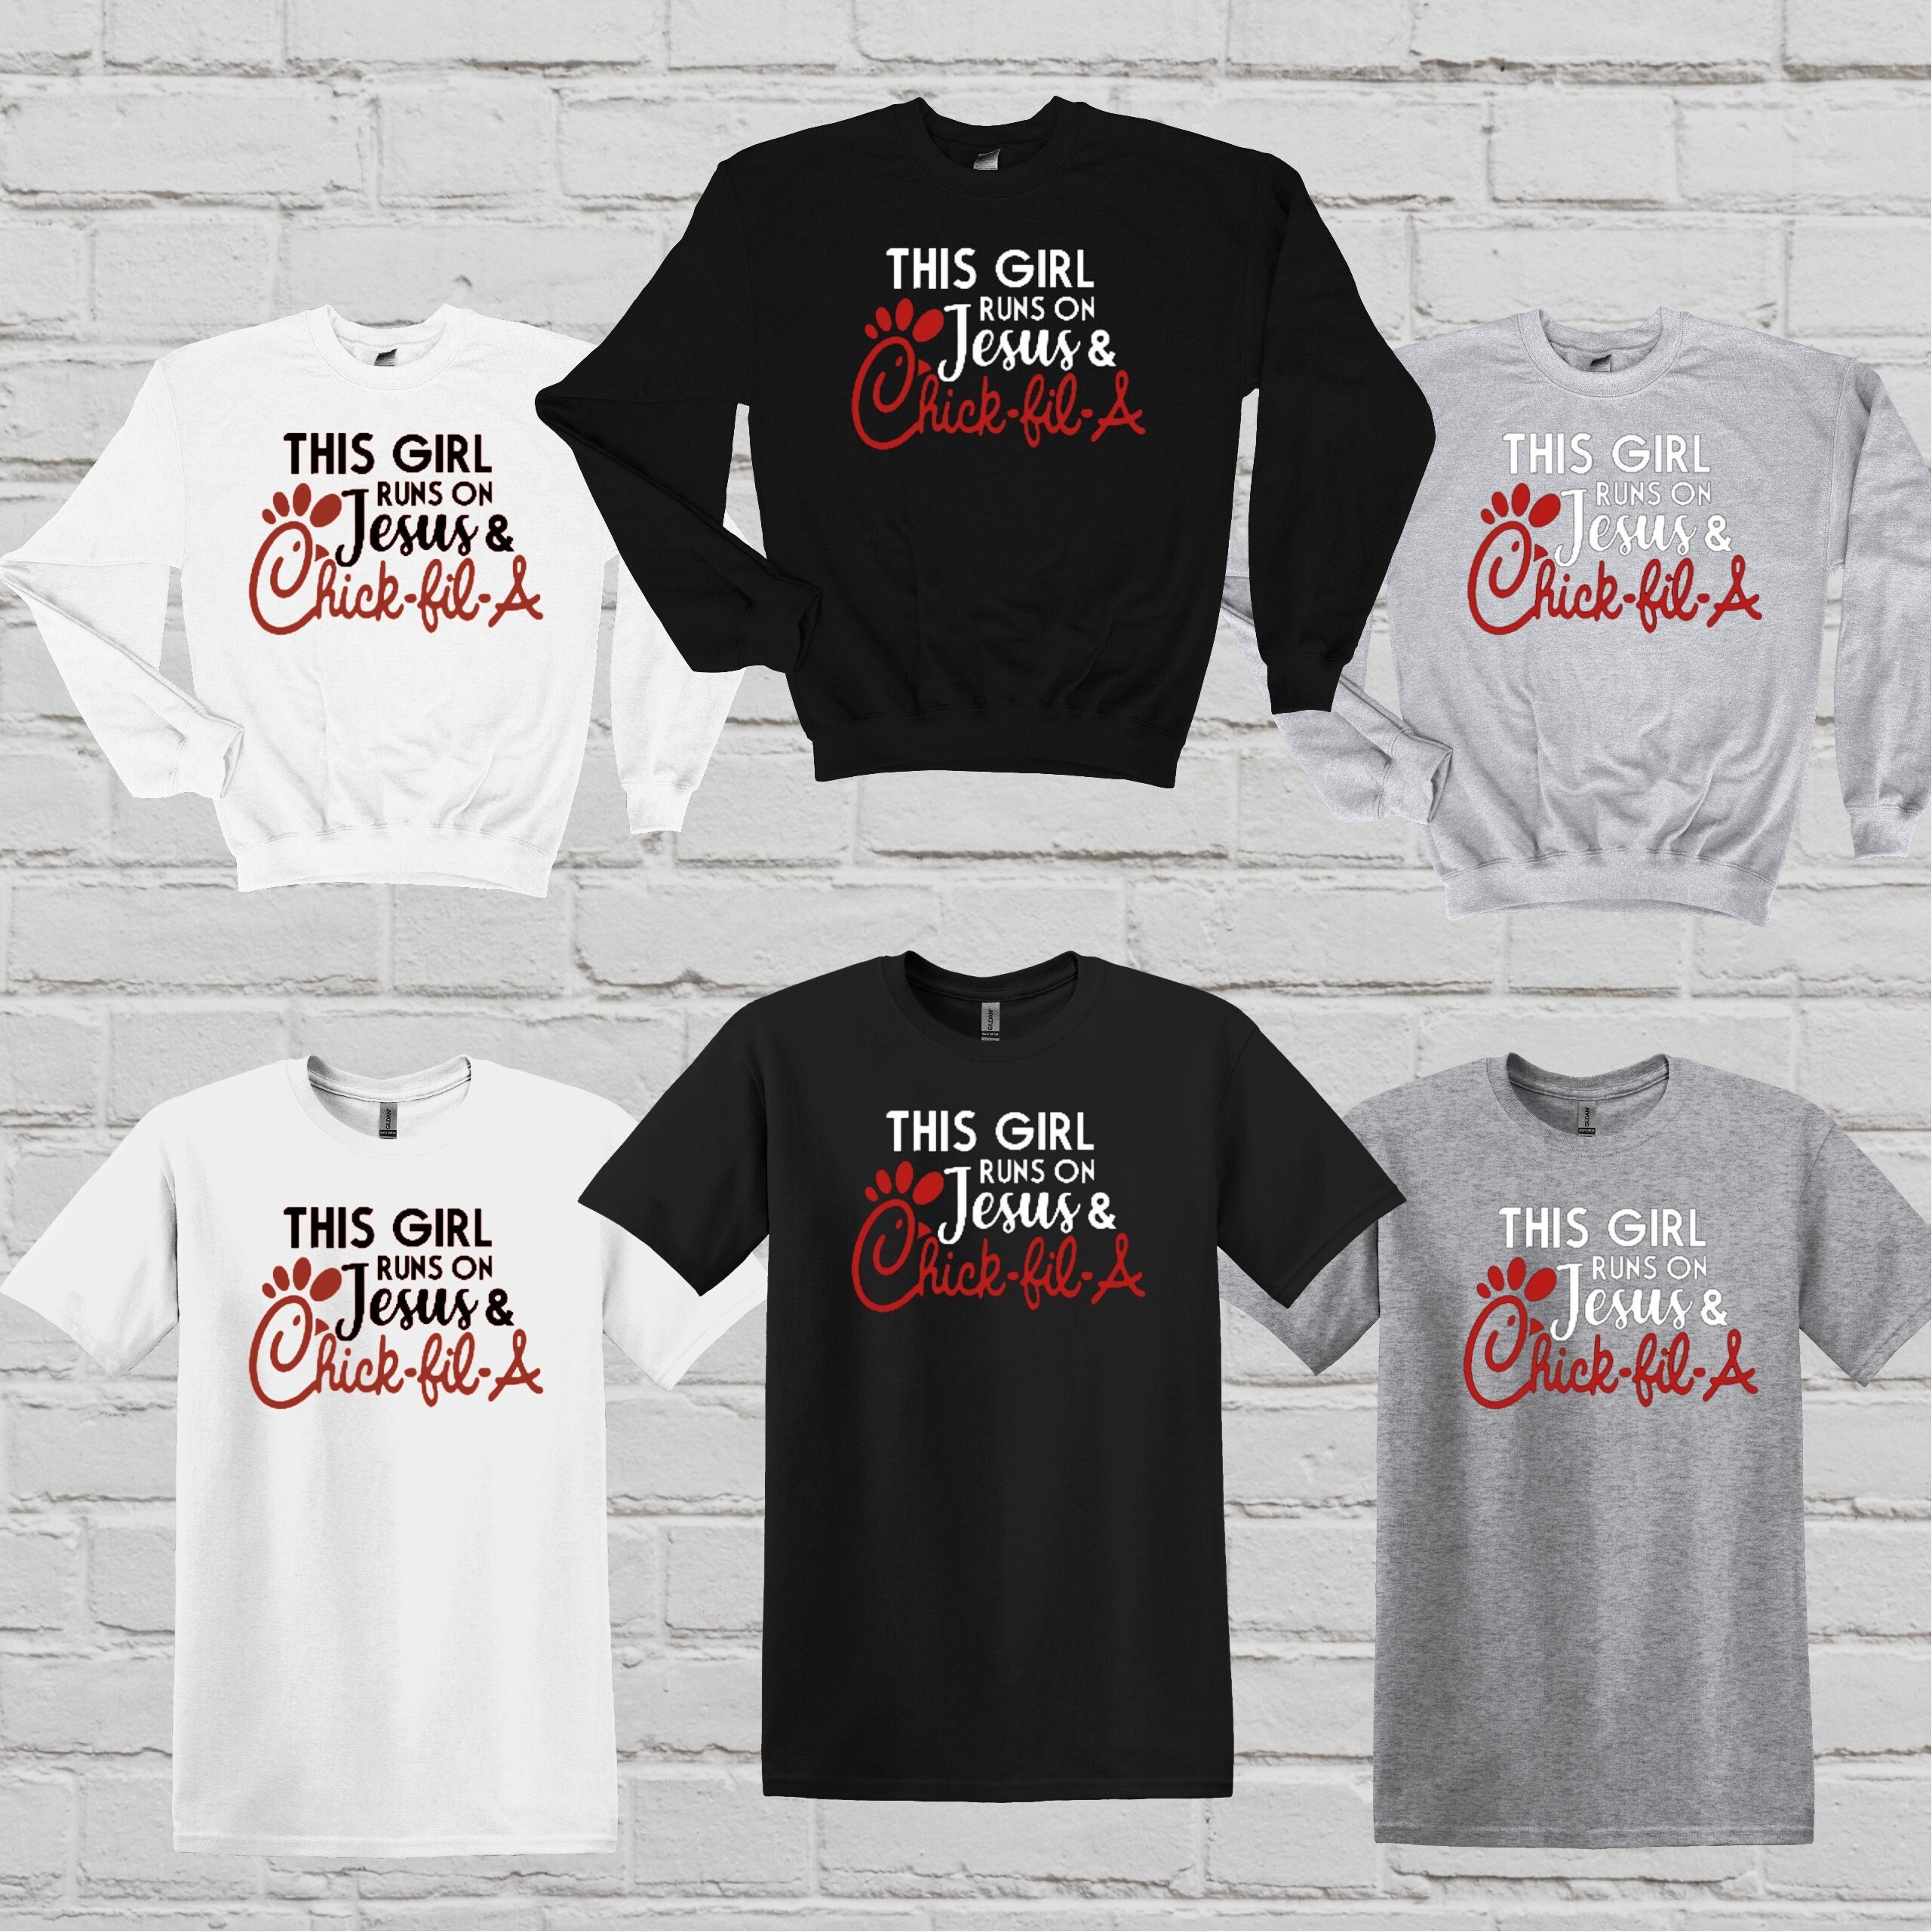 Chick-fil-A Clermont on X: Looking for a last minute gift? Chick